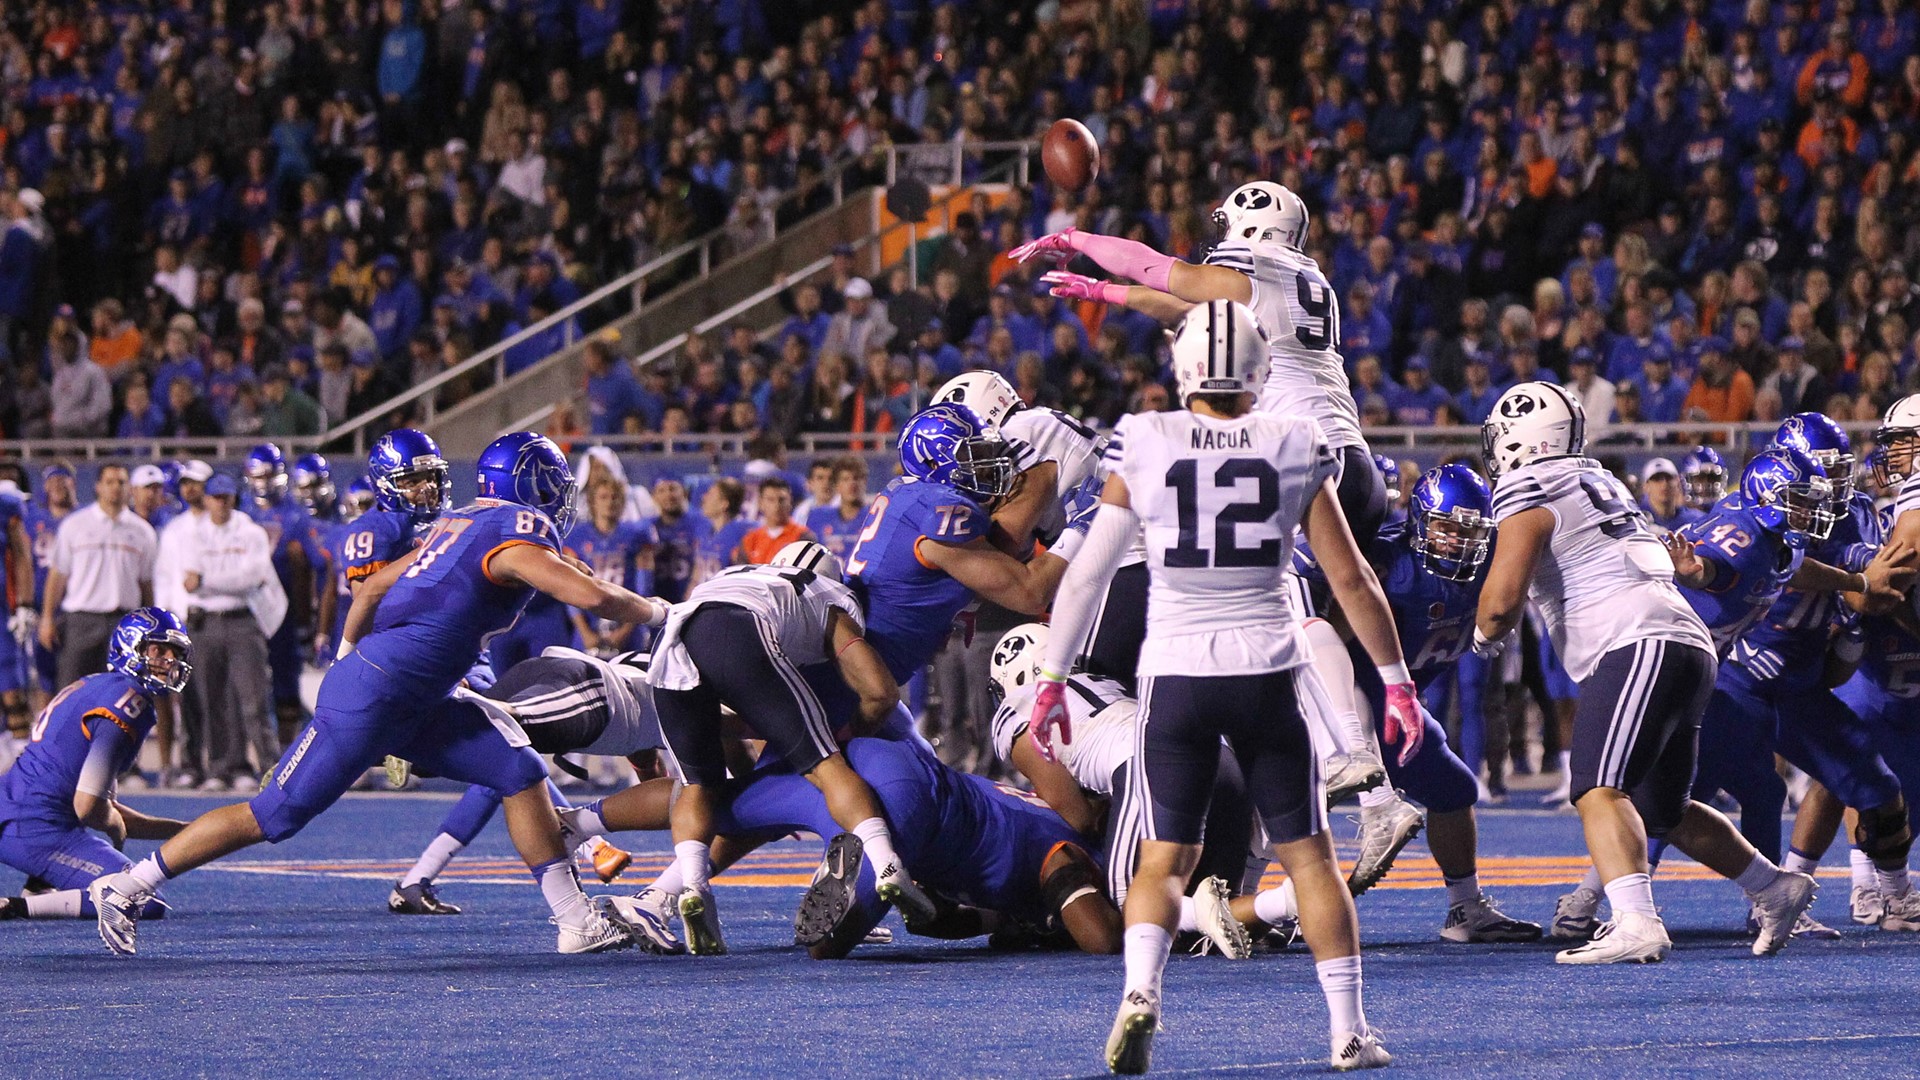 Boise State football It’s now a staple of both teams’ schedules